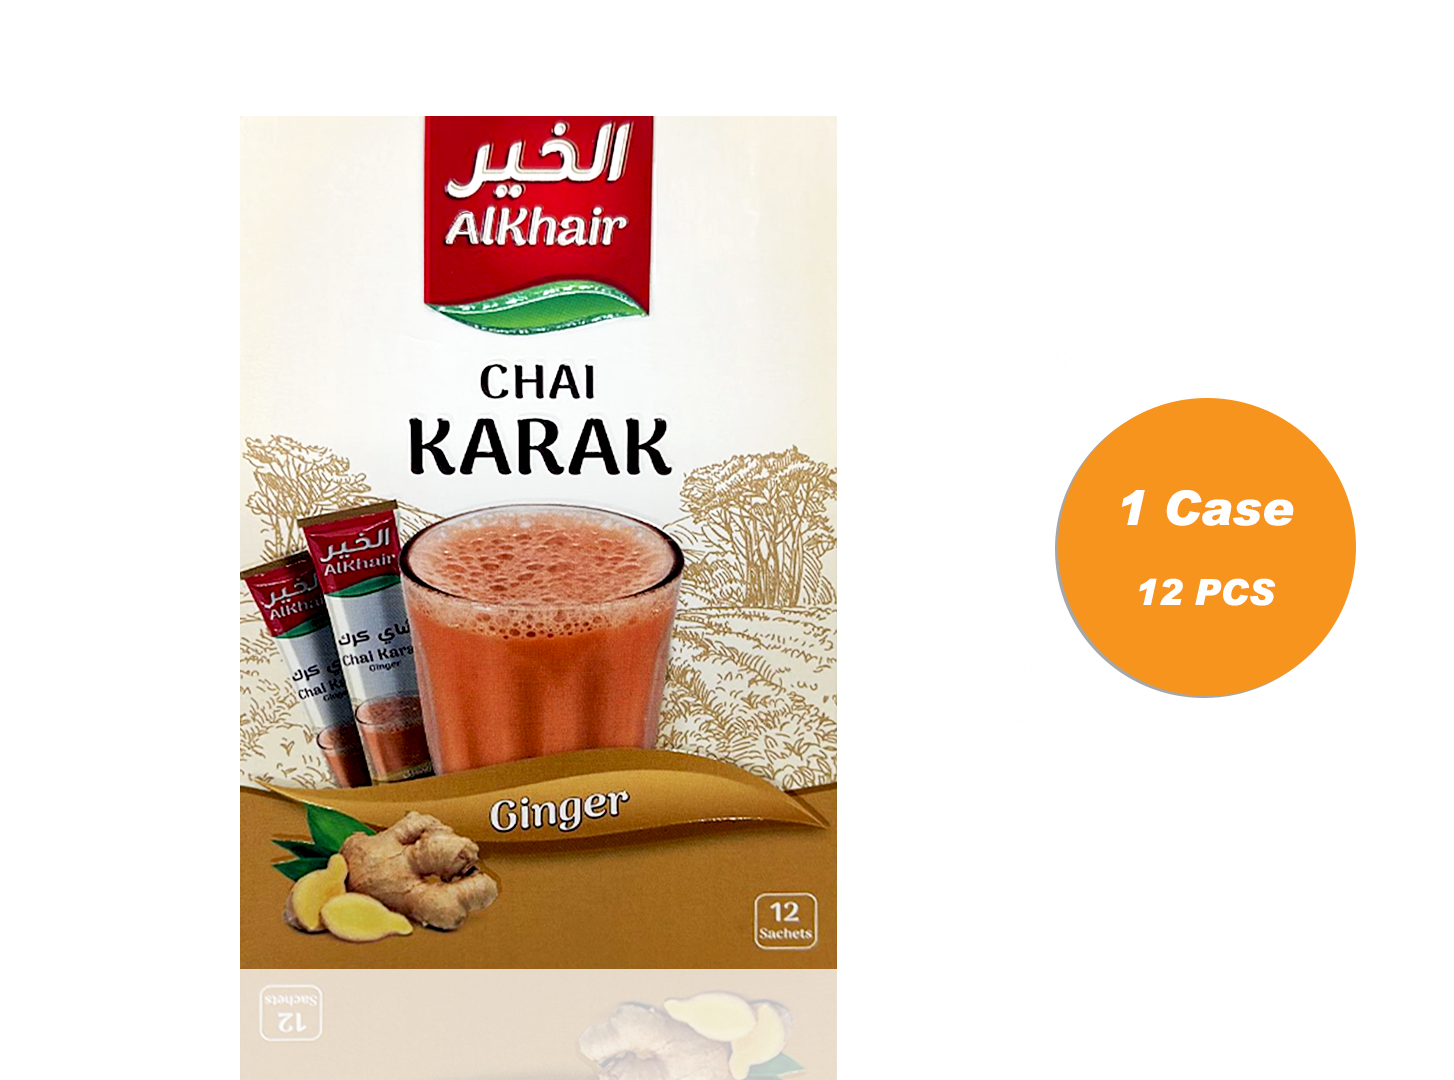 A photo declares to order a case of Alkhair Instant karak with ginger